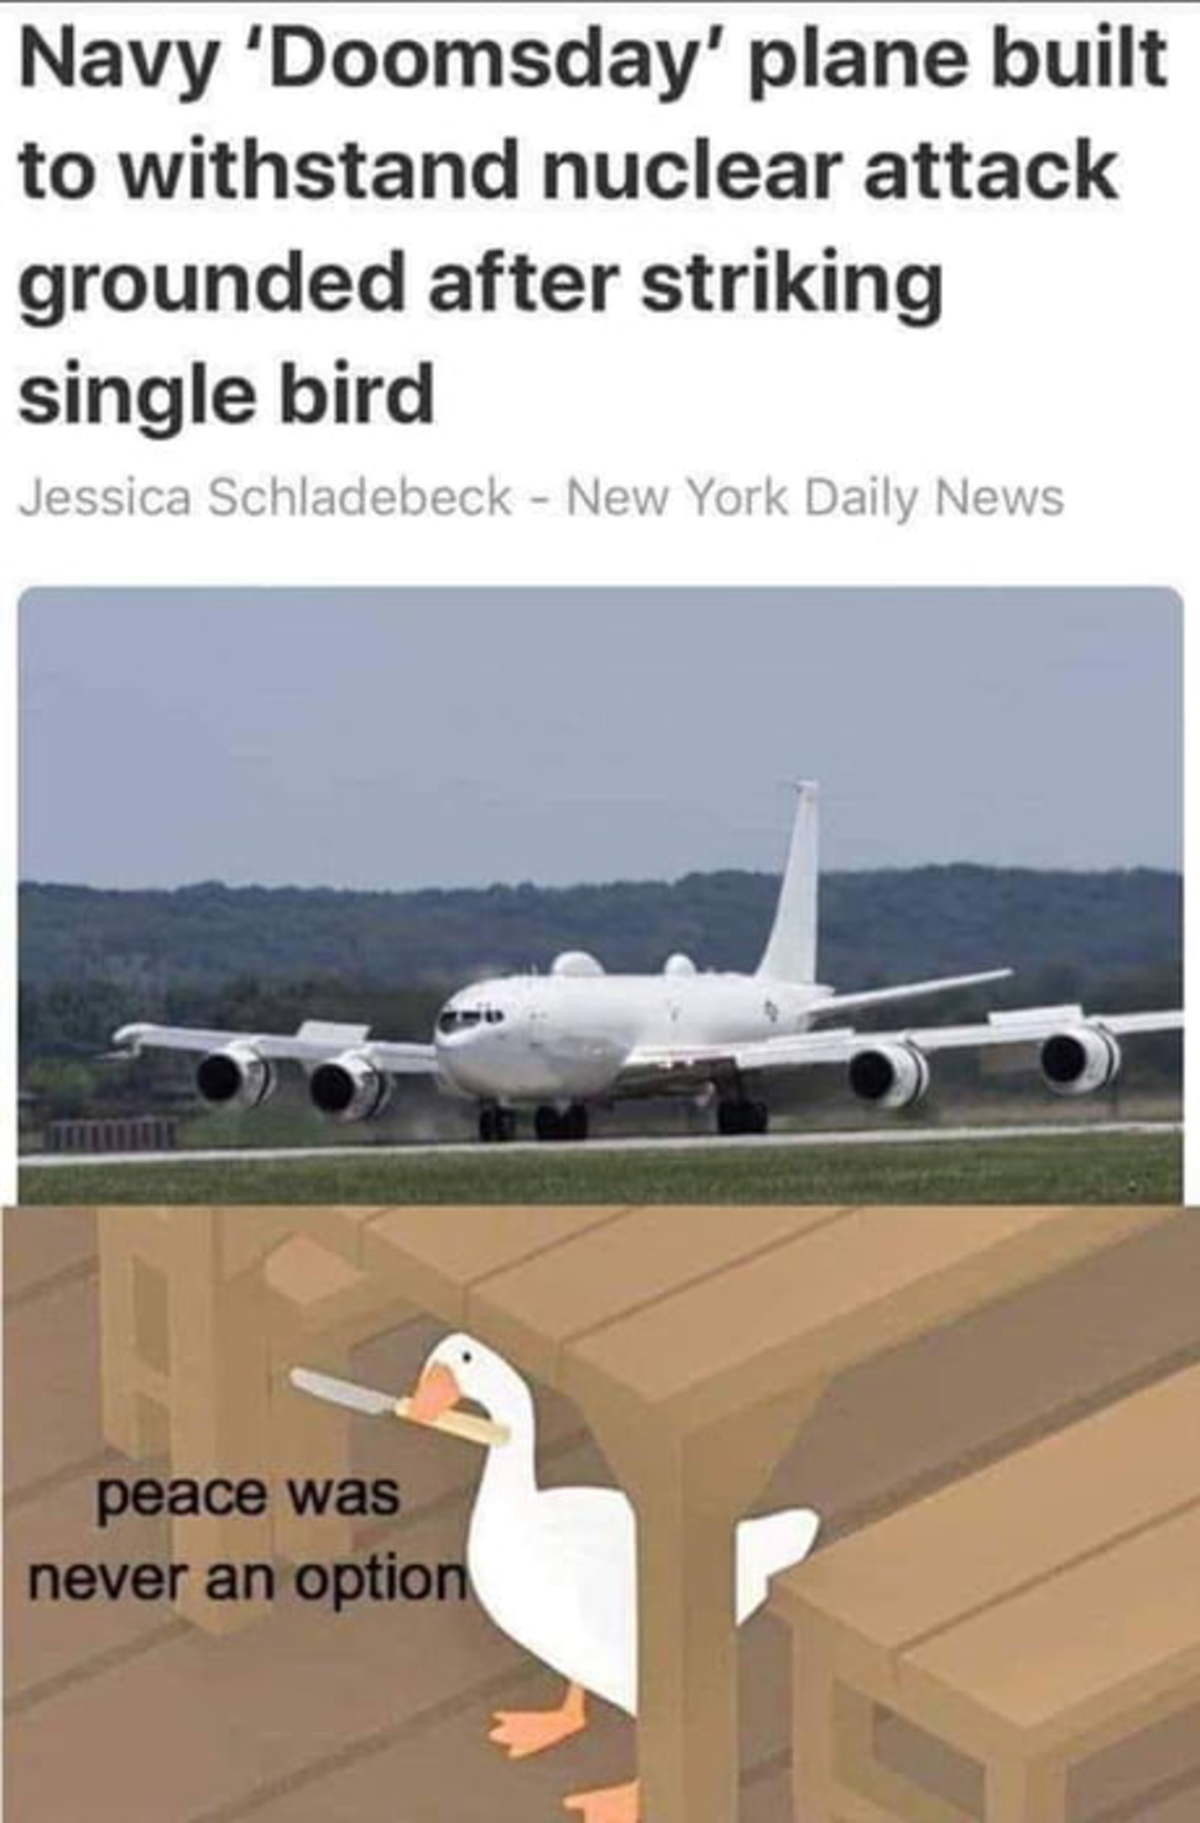 There are birds more dangerous than nukes out there.. .. it's like they spent a lot of money on the plane and they want to maintain absolute, unquestionable effectiveness, instead of taking chances with details, unlik